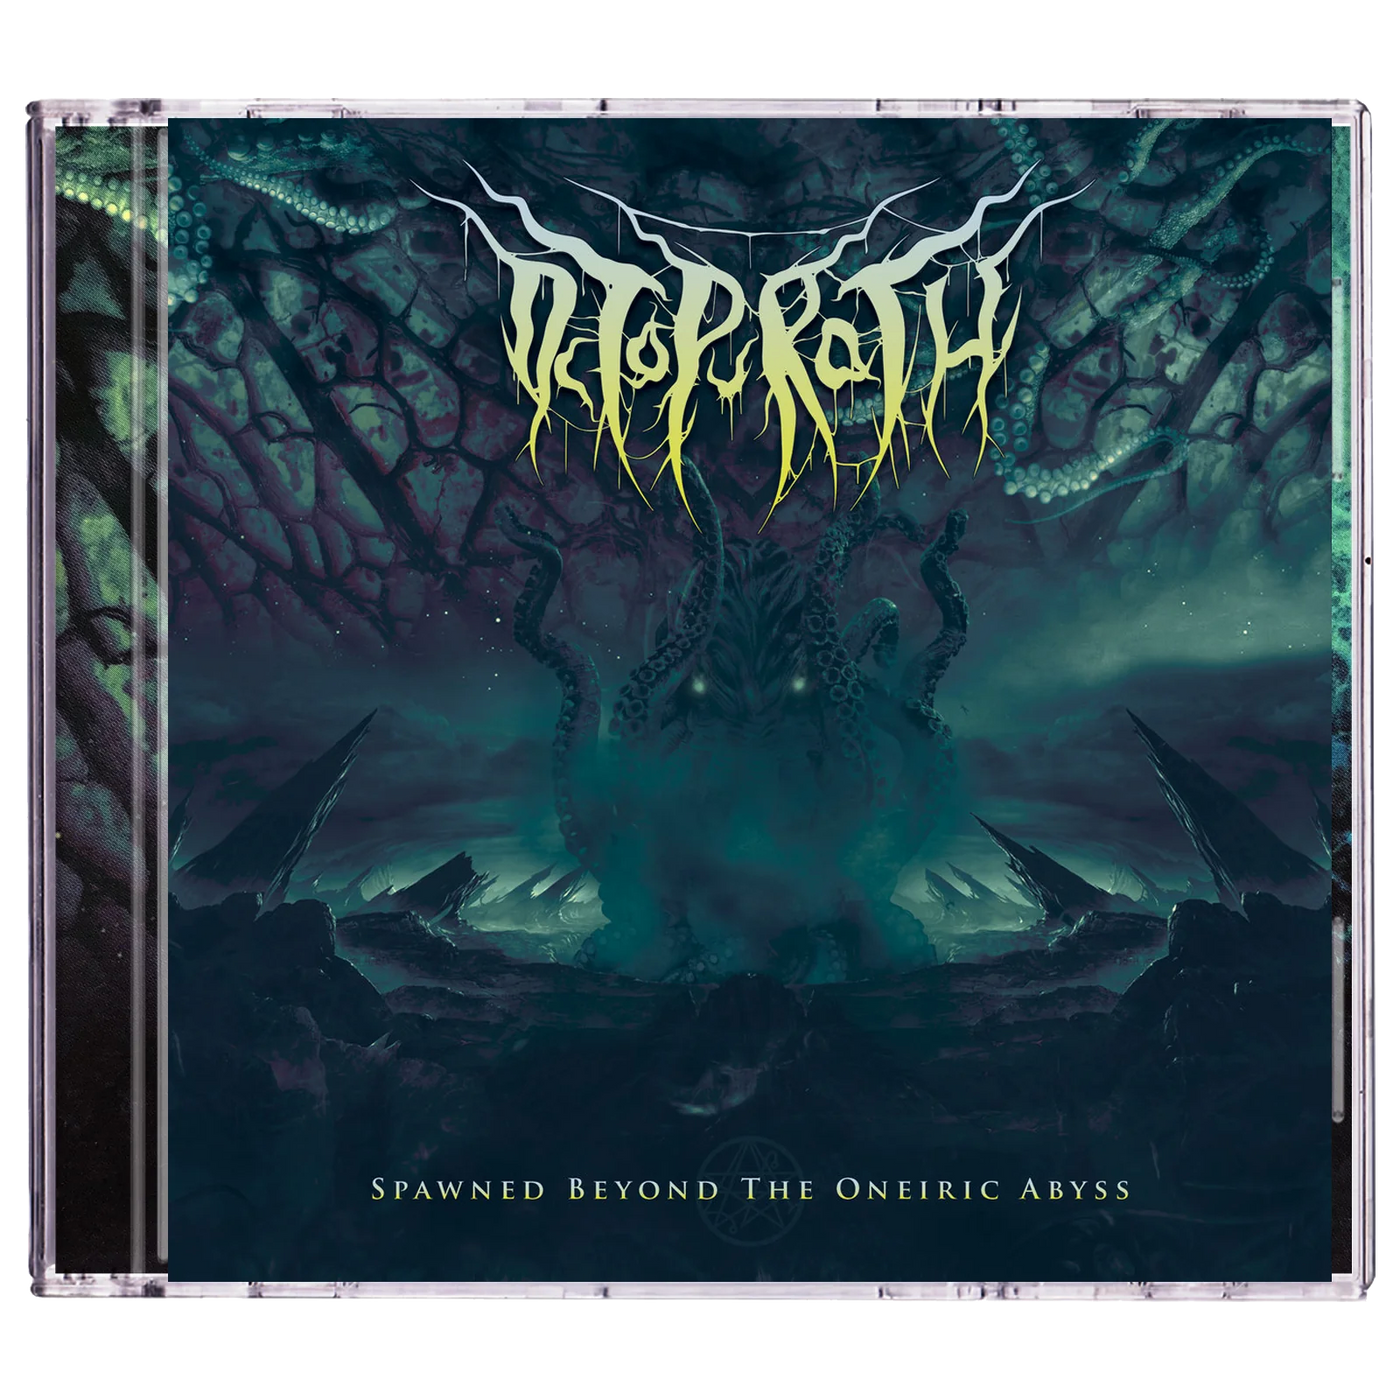 Octopurath 'Spawned Beyond The Oneiric Abyss' CD